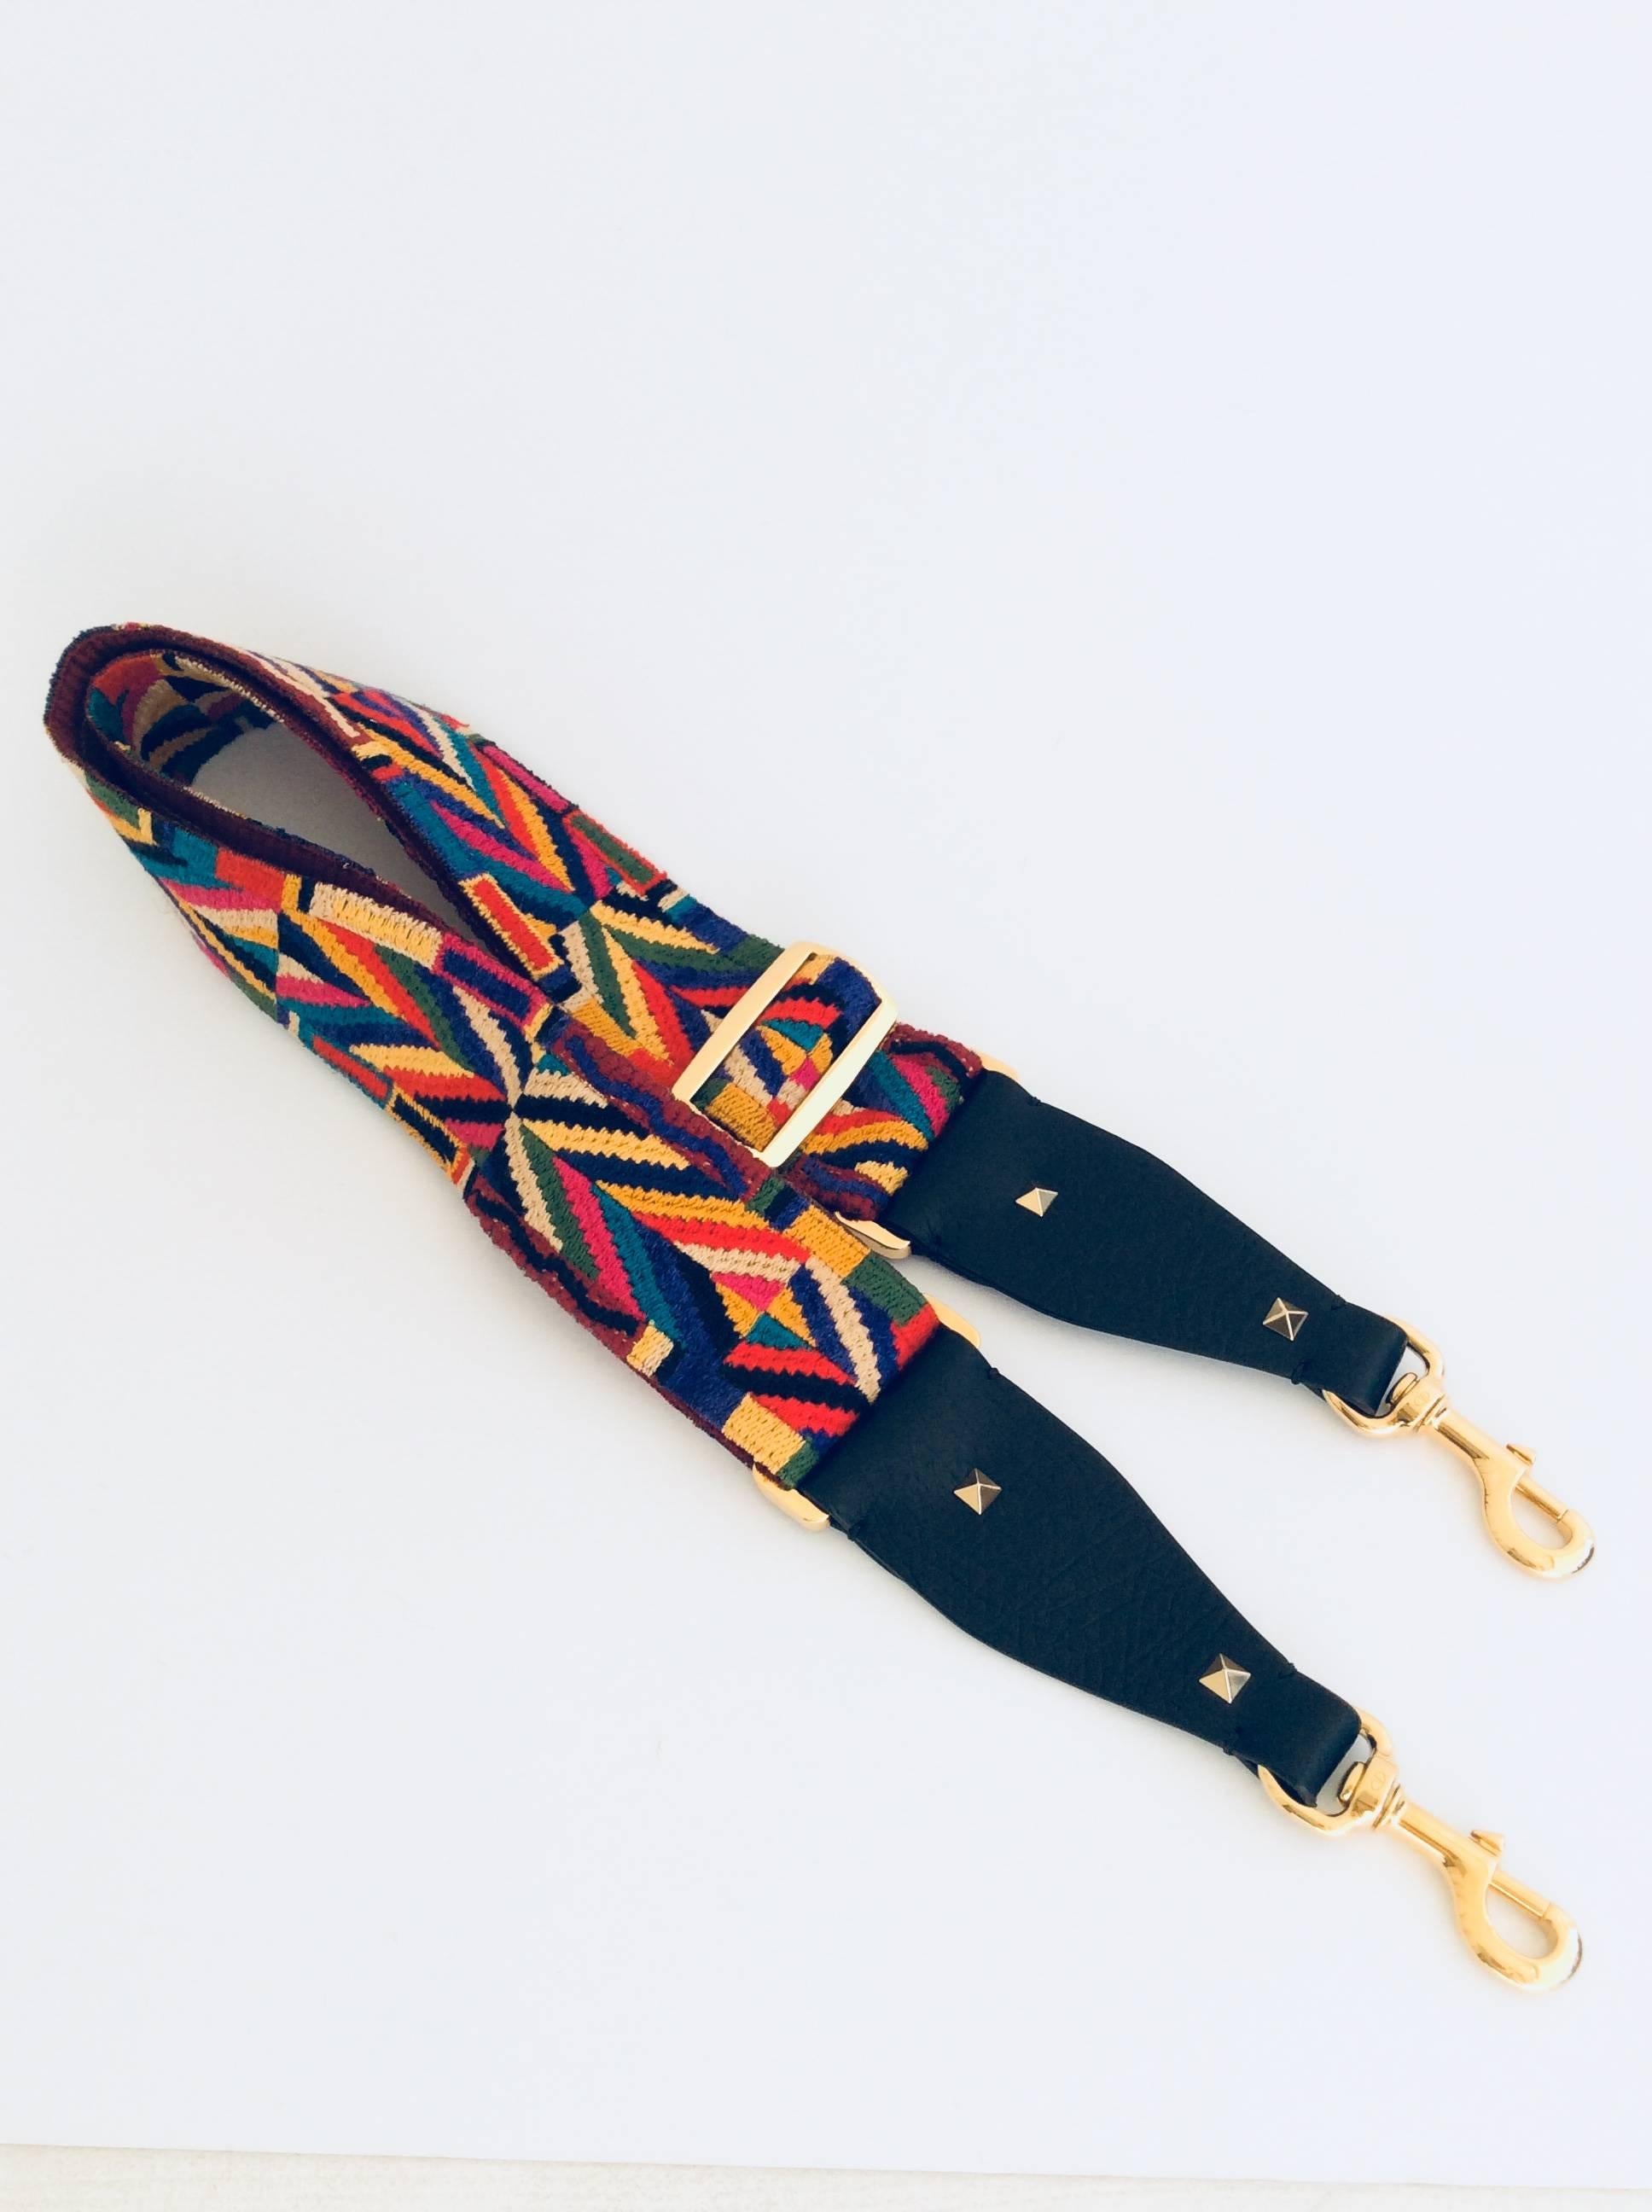 Valentino colorful southwestern inspired adjustable cotton shoulder strap embroidered in Native Couture 1975.
The buckles are gold colored metal as are the two lobster clasps on the black Stampa Alec leather ends.

Dimensions: 54” L - 2” W
